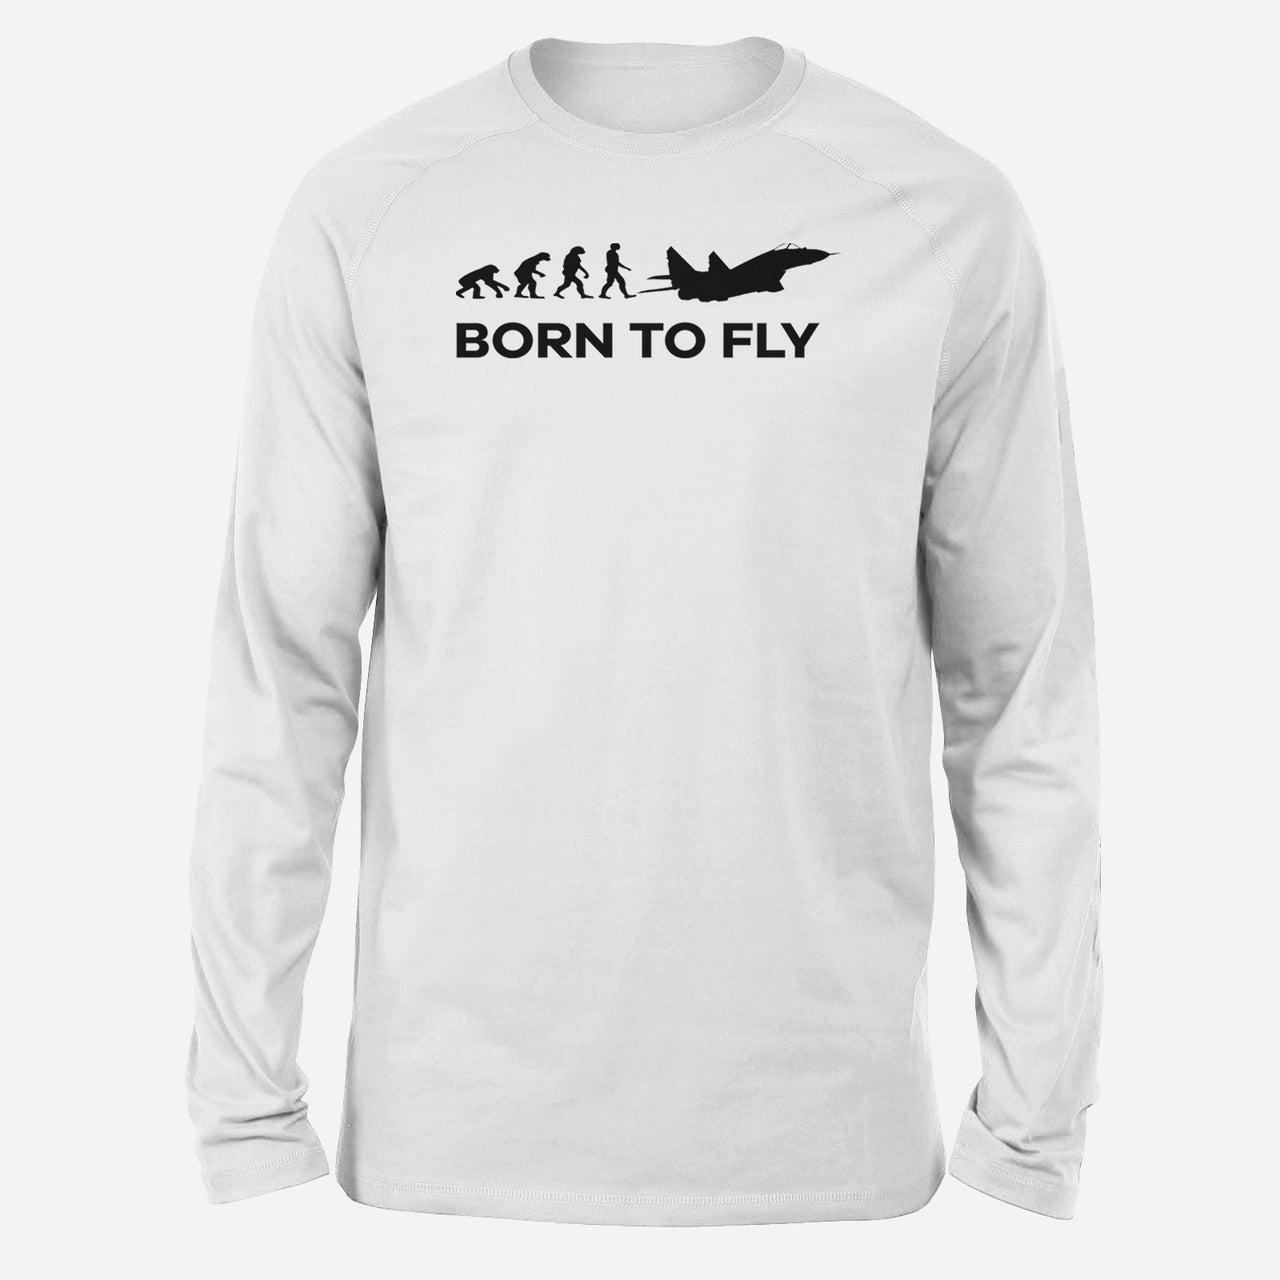 Born To Fly Military Designed Long-Sleeve T-Shirts